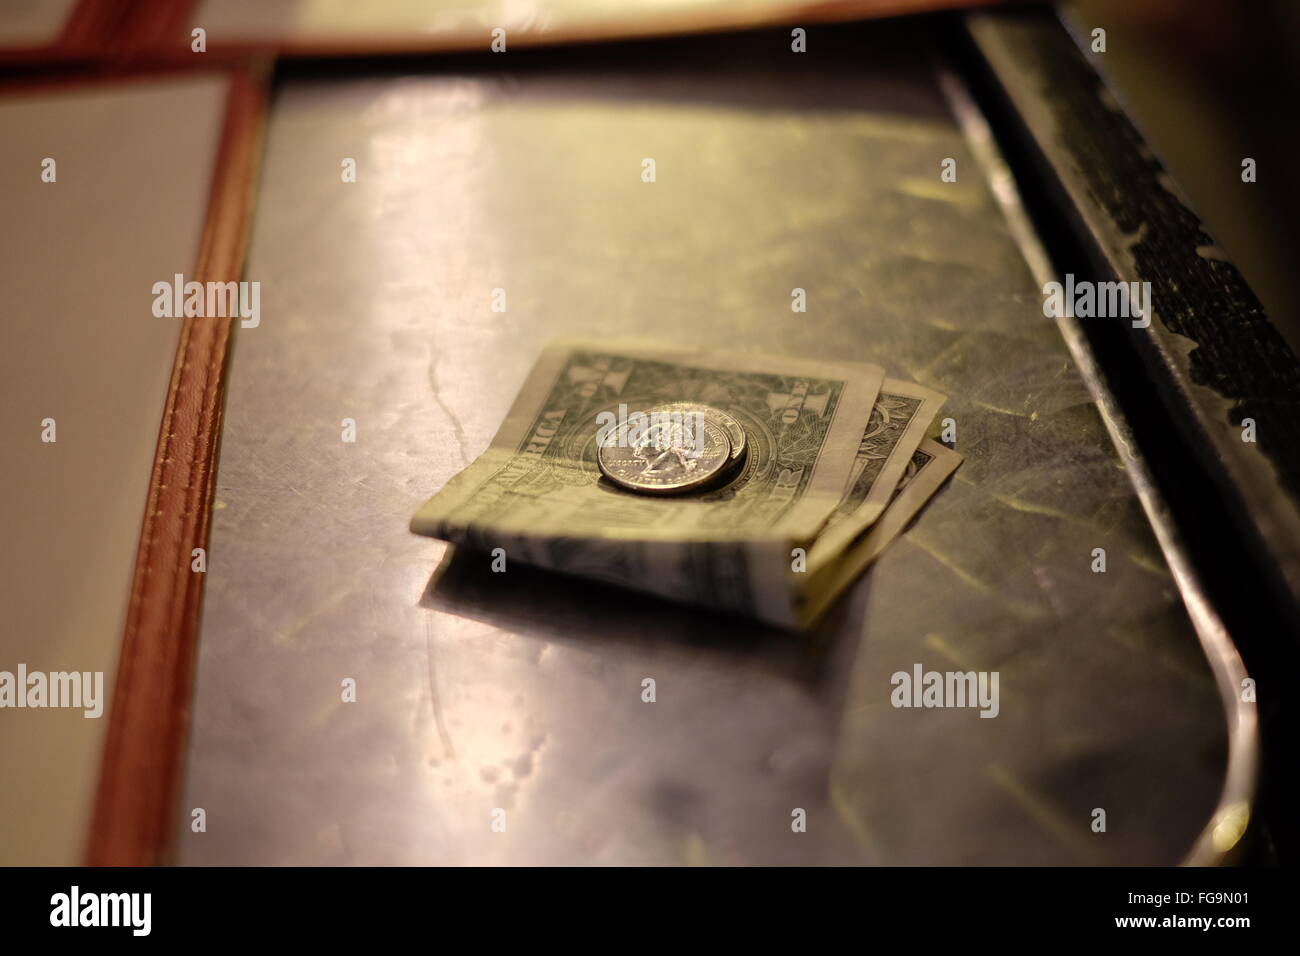 High Angle View Of Us Paper Currency And Coins On Table Stock Photo